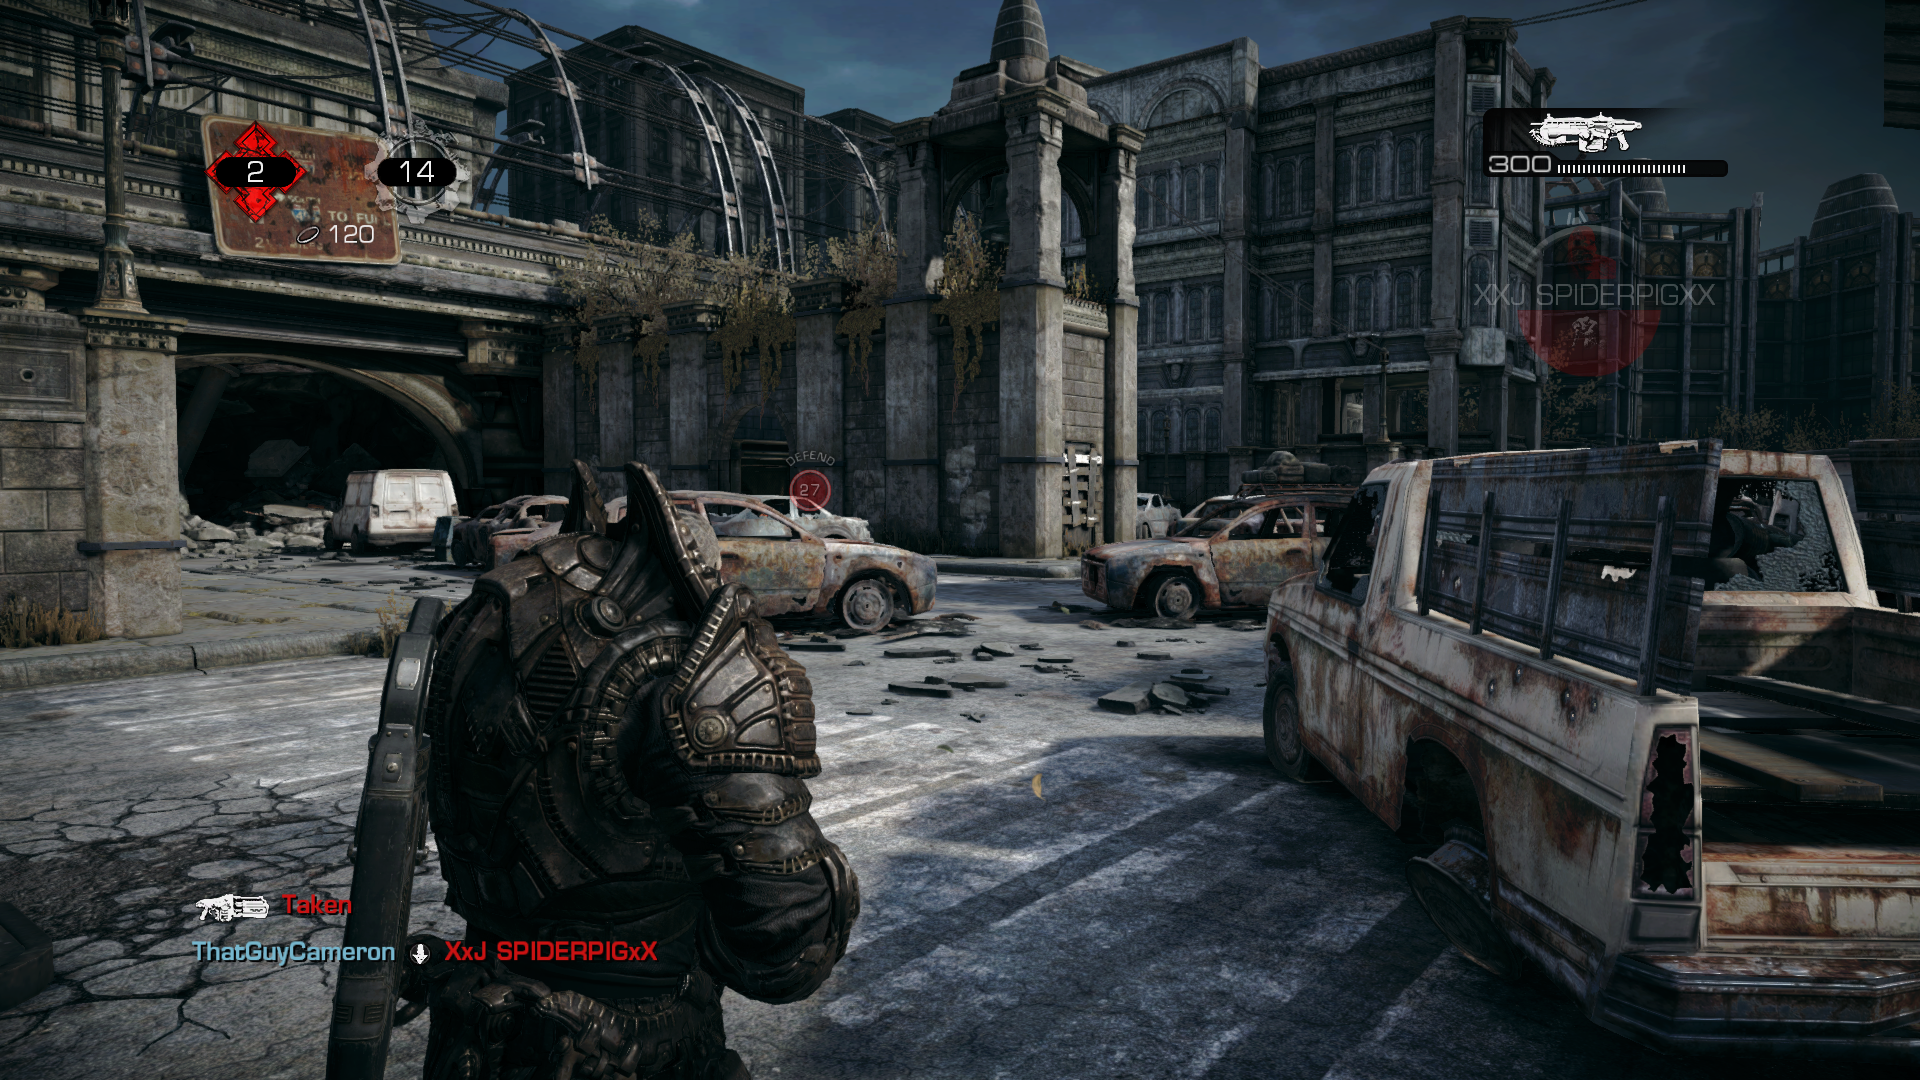 Gears of War: Ultimate Edition Review – Eggplante!